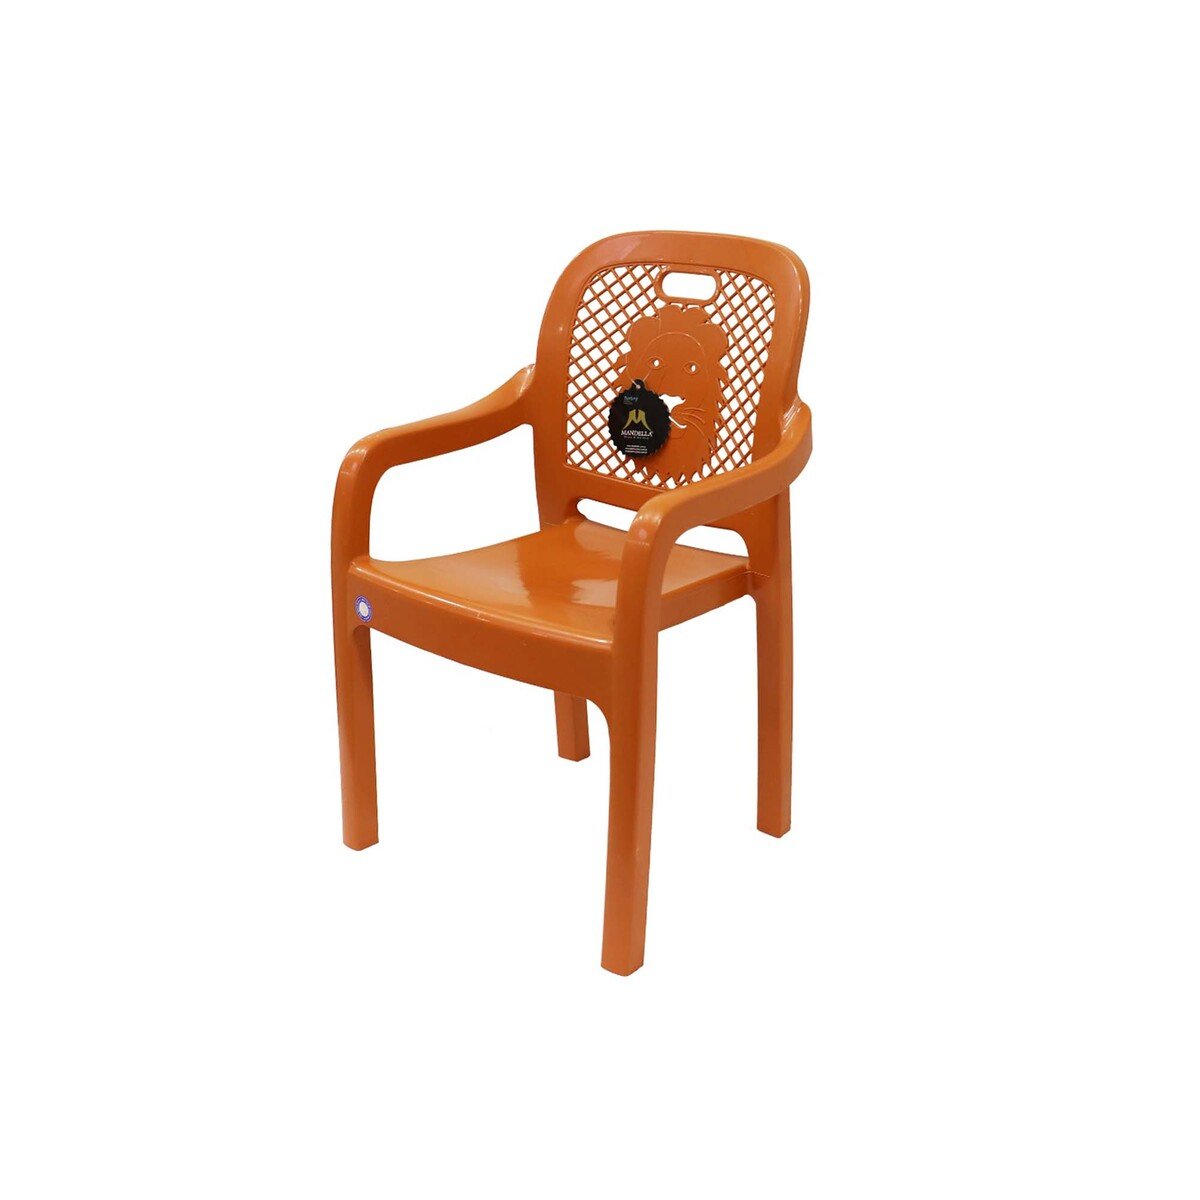 Saglam Child Arm Chair Rubi 616 Assorted Colors